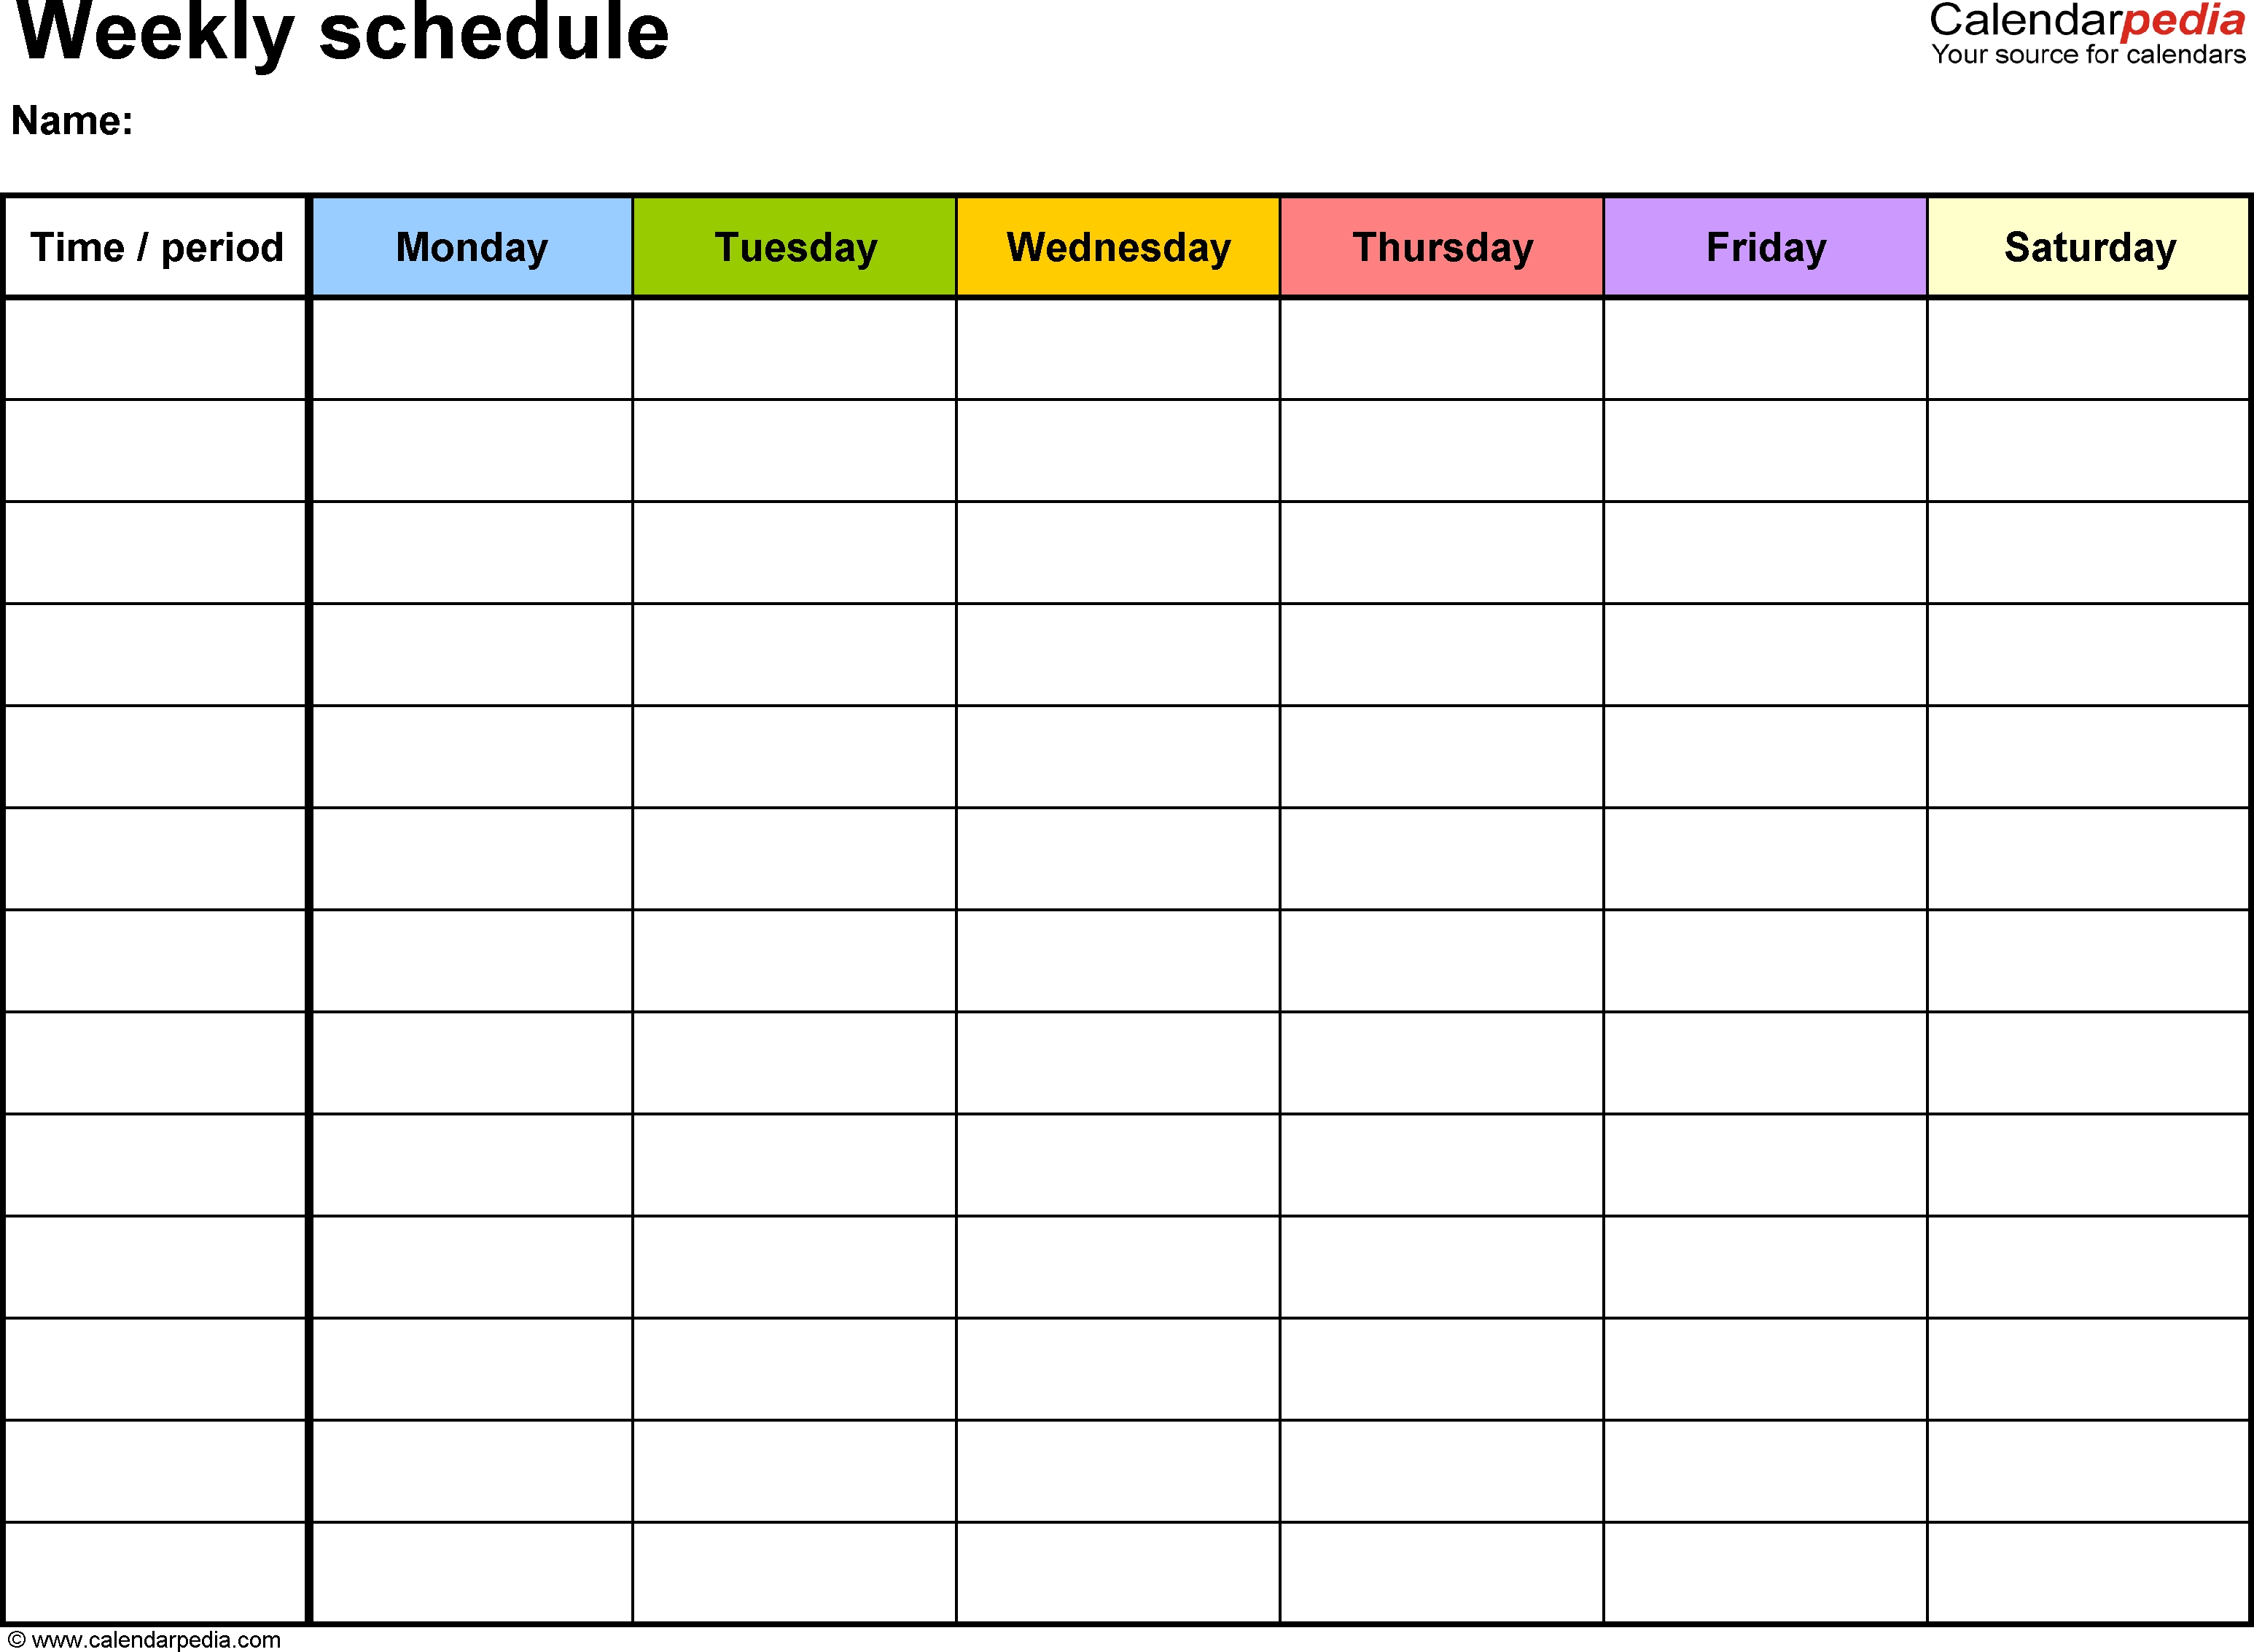 Free Weekly Schedule Templates For Word - 18 Templates  Monthly Calendar Templates Monday To Friday